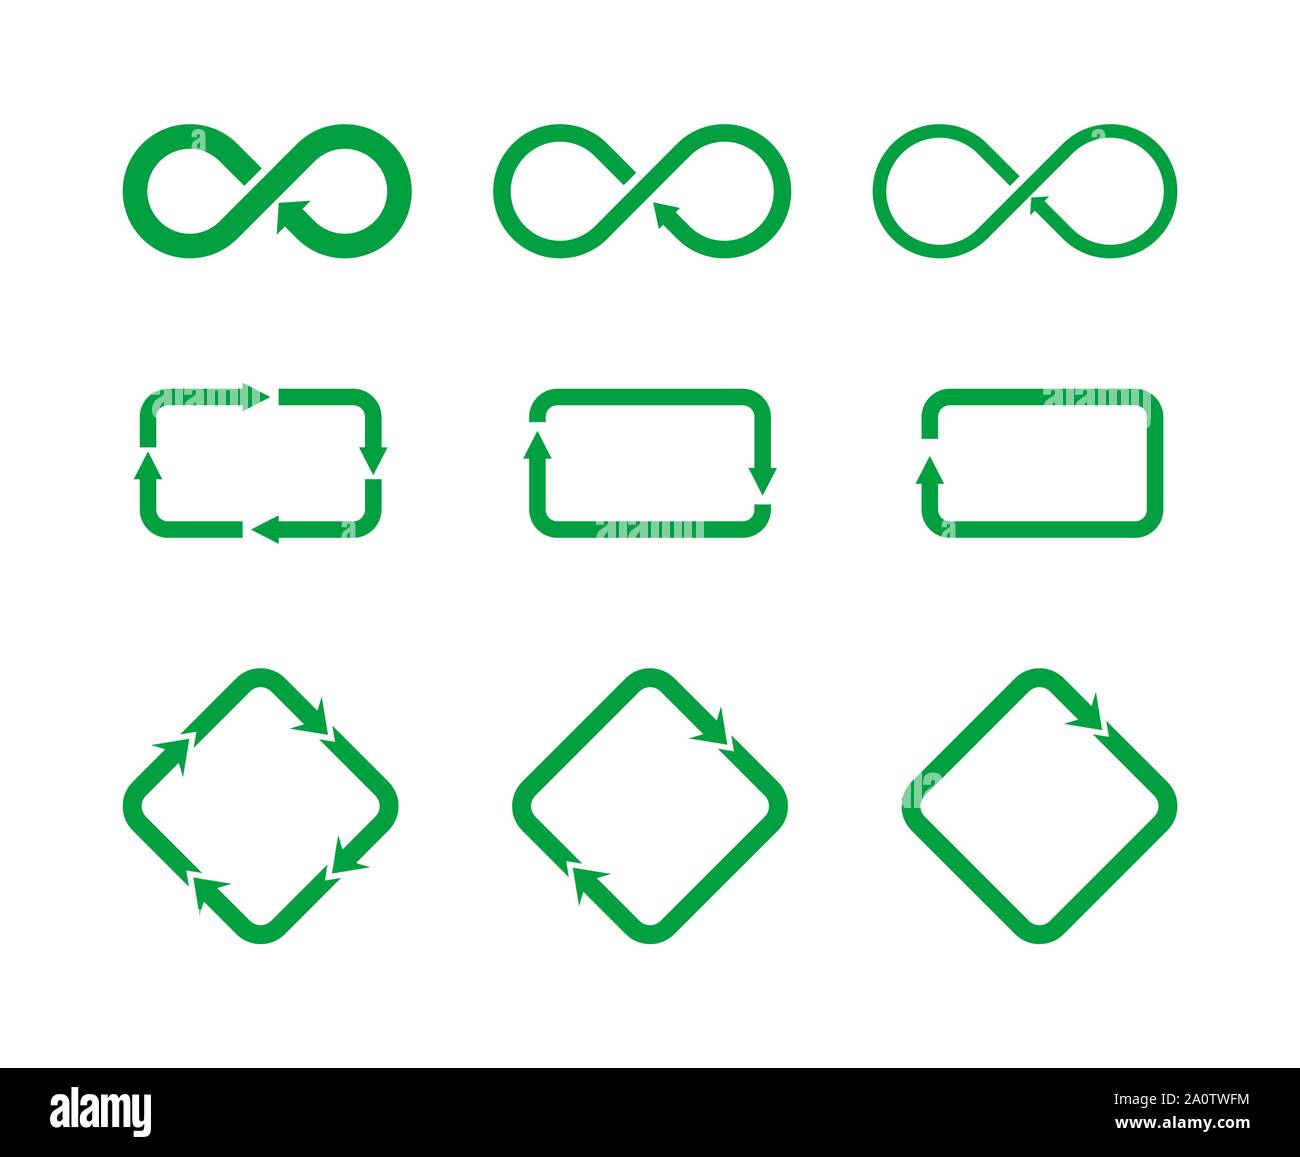 Set of different icons representing recycling and circulation. Recycle symbol sign set. Infinite loop icon. Rhombus with arrows. Rectangle with arrows Stock Vector